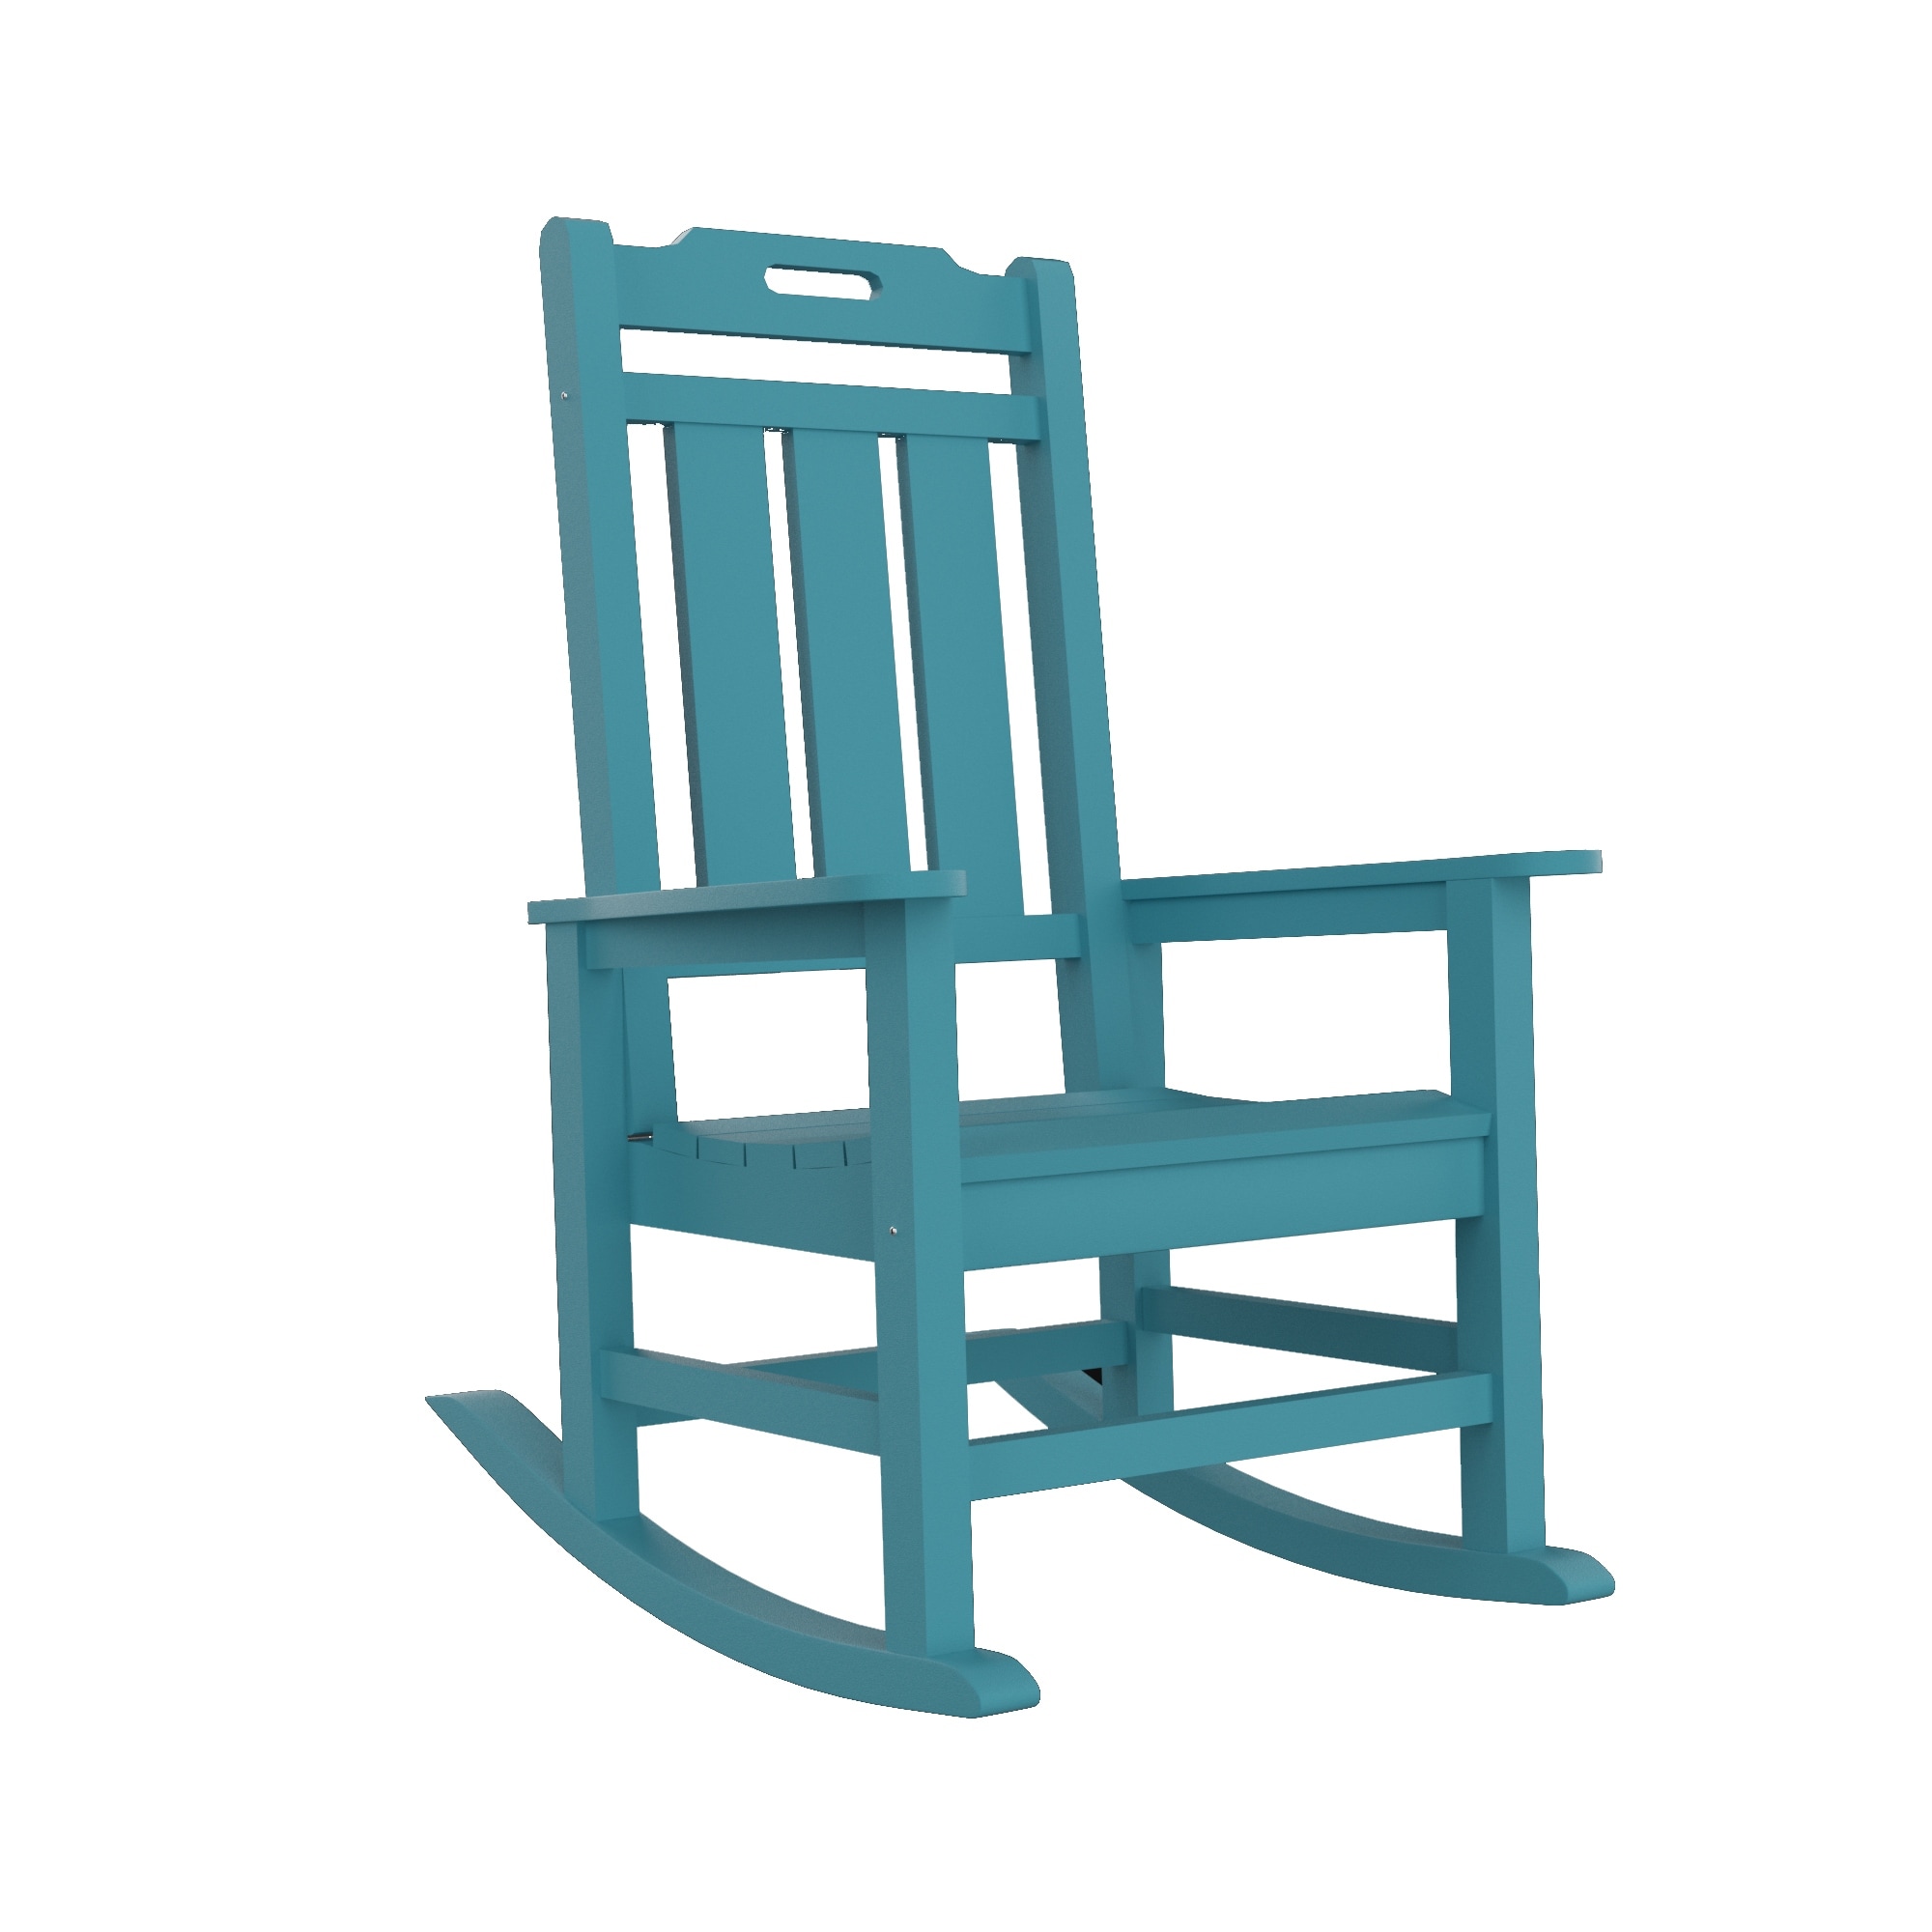 Outdoor Garden Adirondack Rocking Chair  Features A Tall Slanted Back Design  All-weather Waterproof.